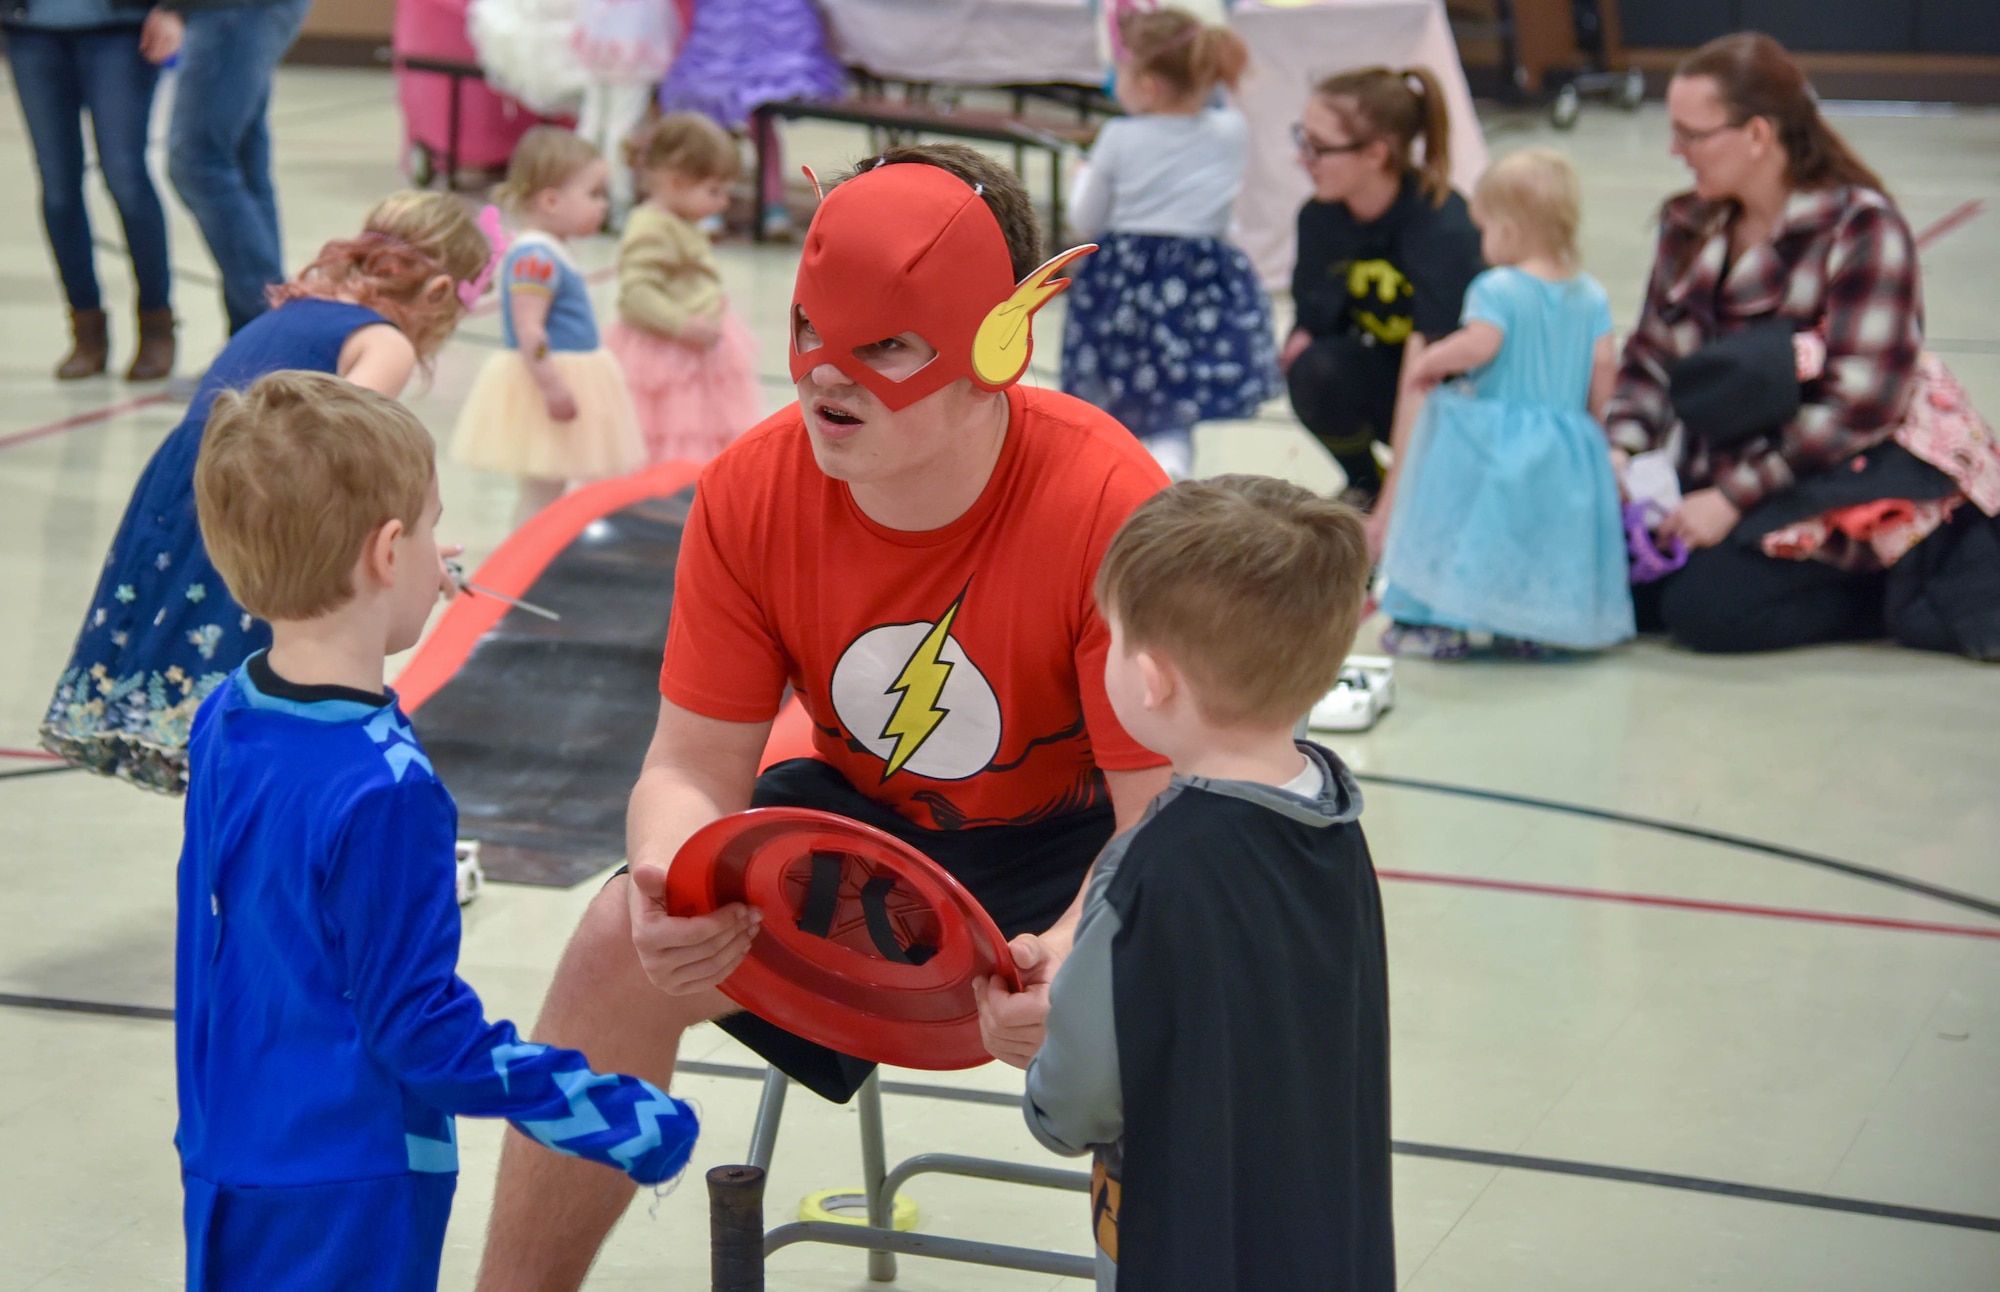 Brayden Frey, South Dakota National Guard Youth Council member, dressed up as the super hero Flash chats with kids during the Princess and Super Hero Day Camp April 7, 2018, at the National Guard Armory, Sioux Falls, S.D.